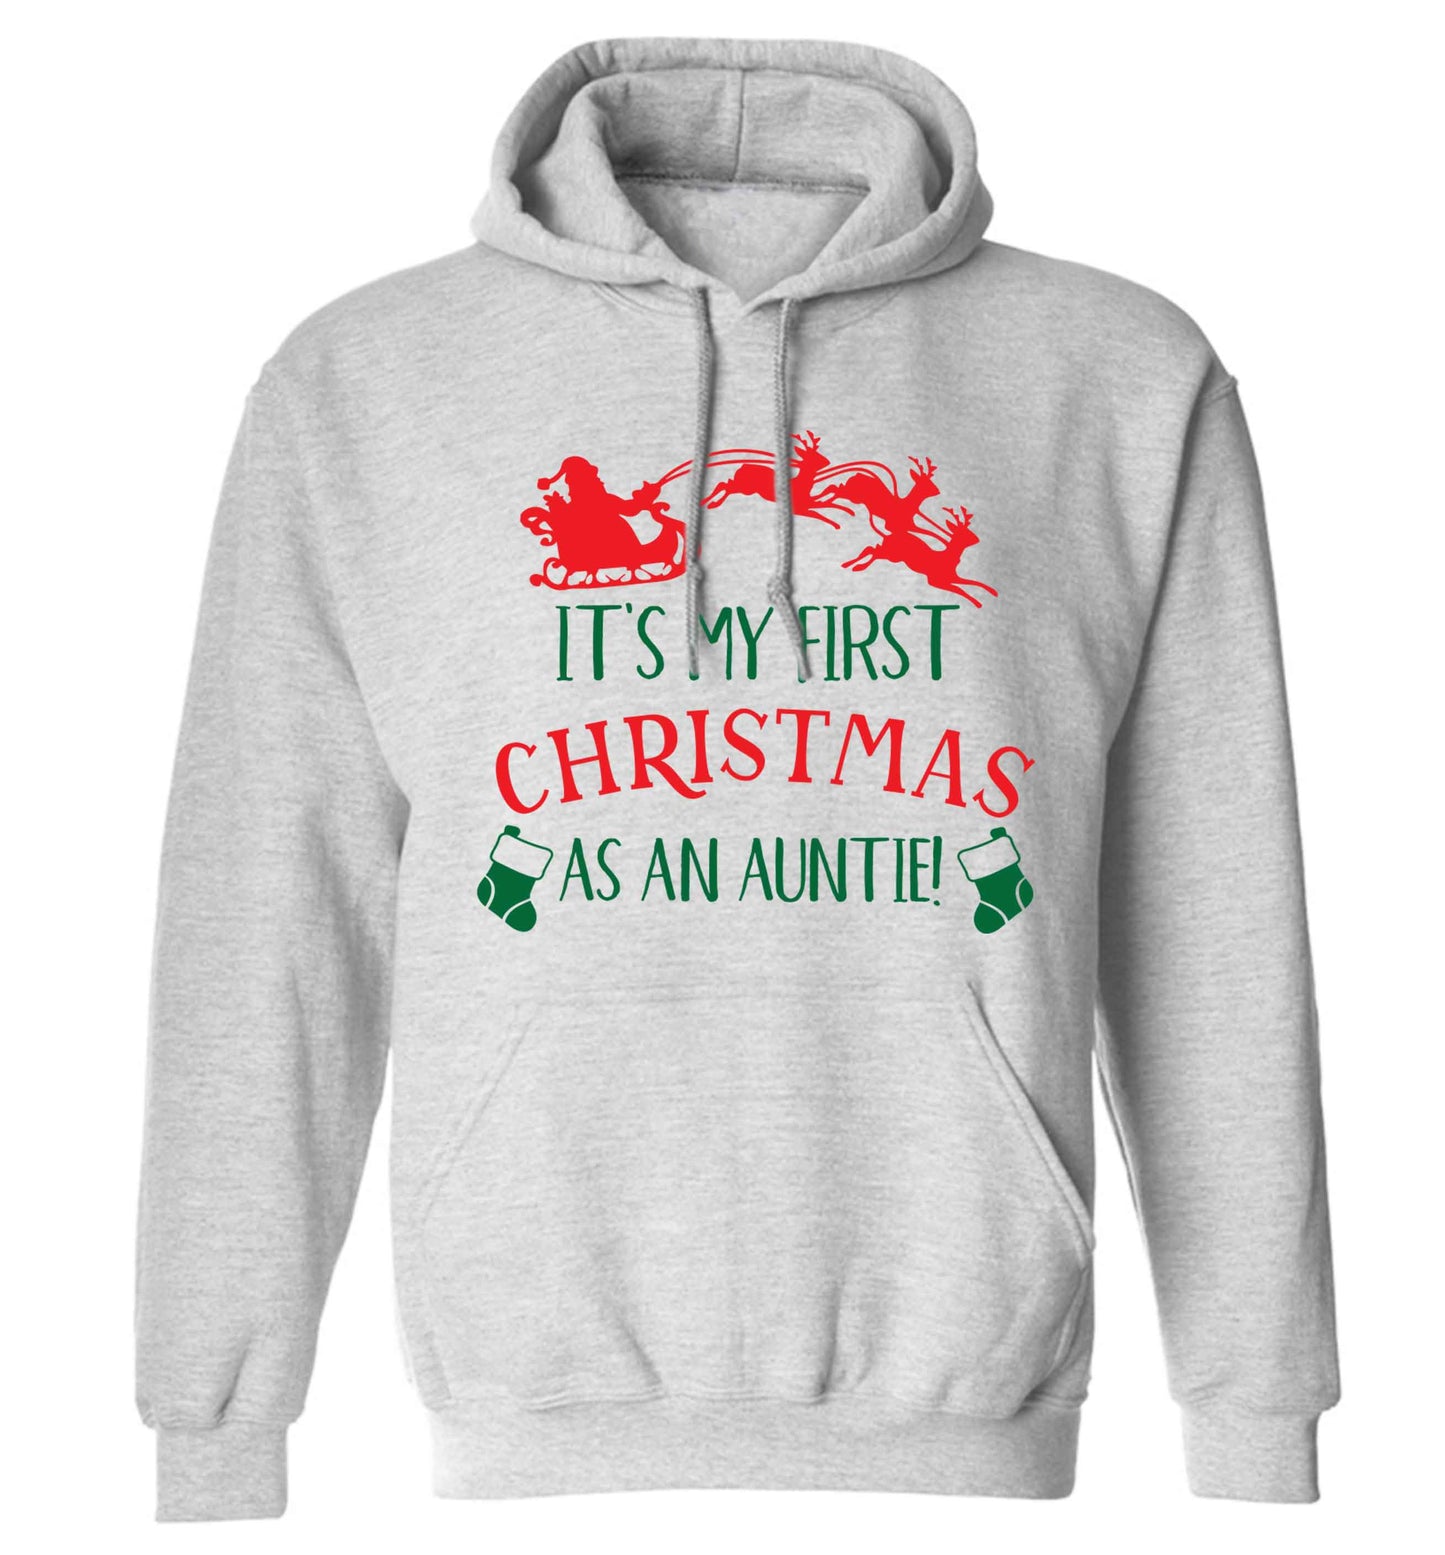 It's my first Christmas as an auntie! adults unisex grey hoodie 2XL